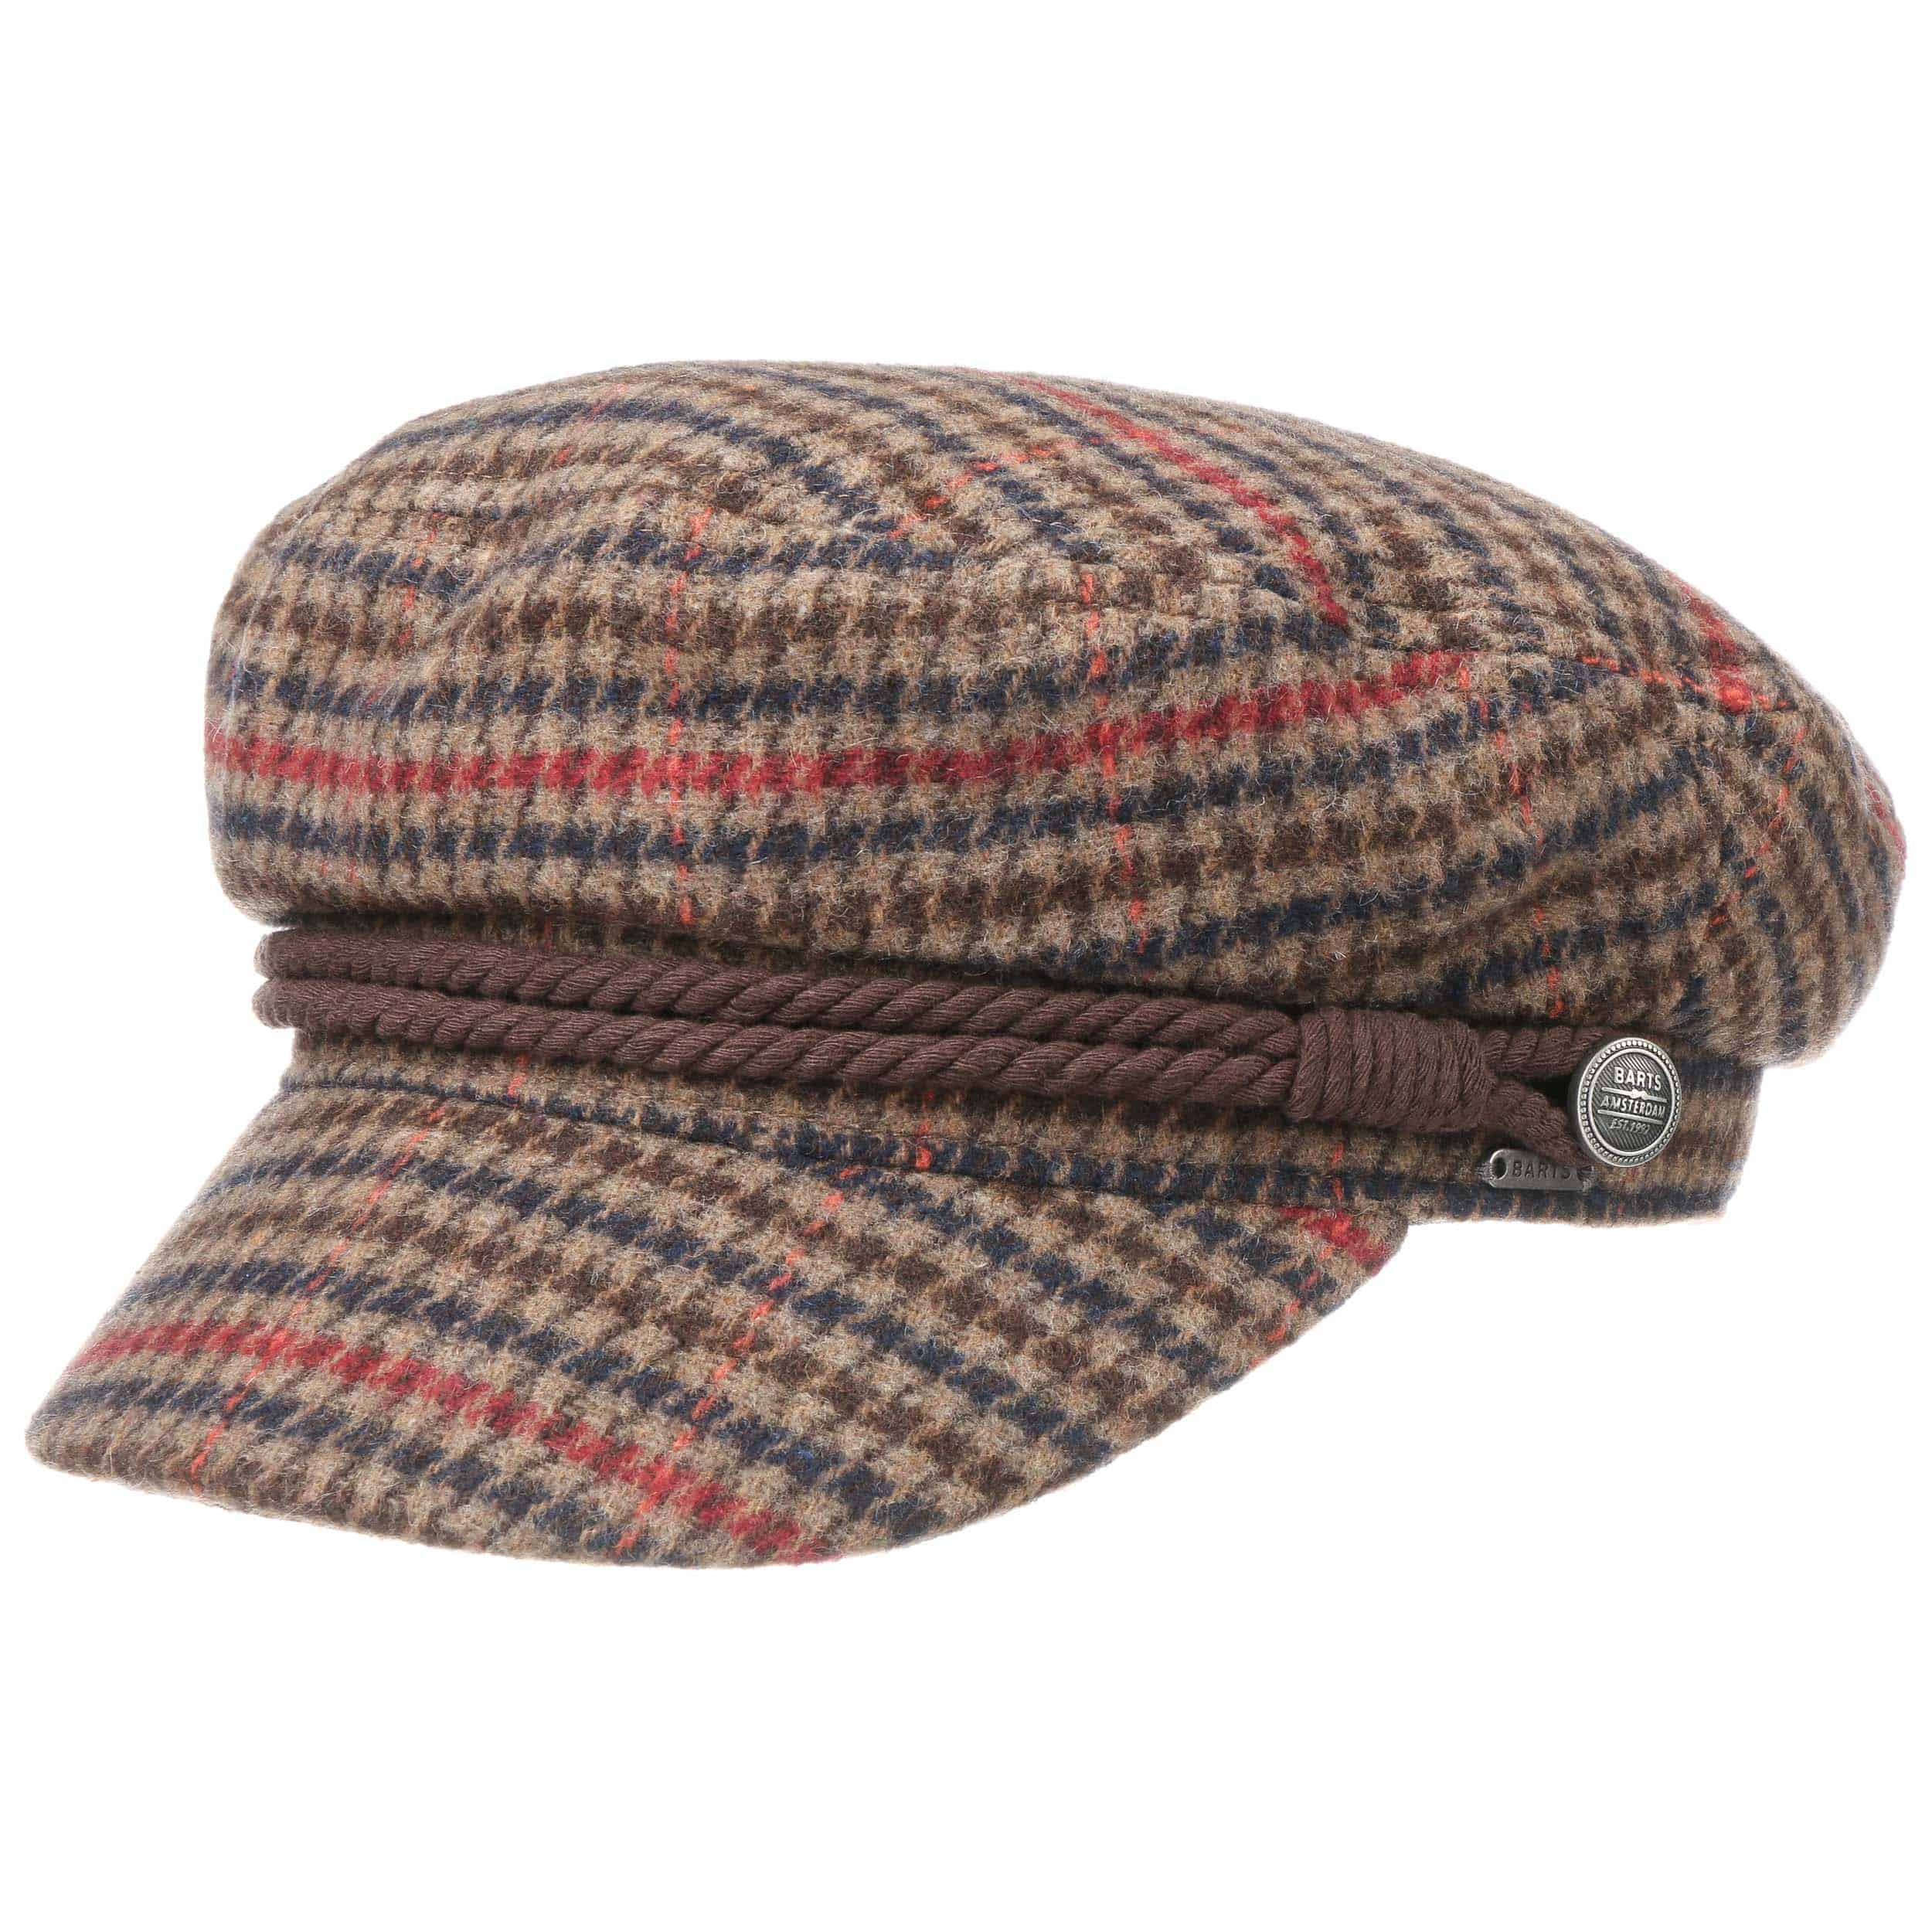 Skipper Houndstooth Fisherman´s Cap by Barts - 32,95